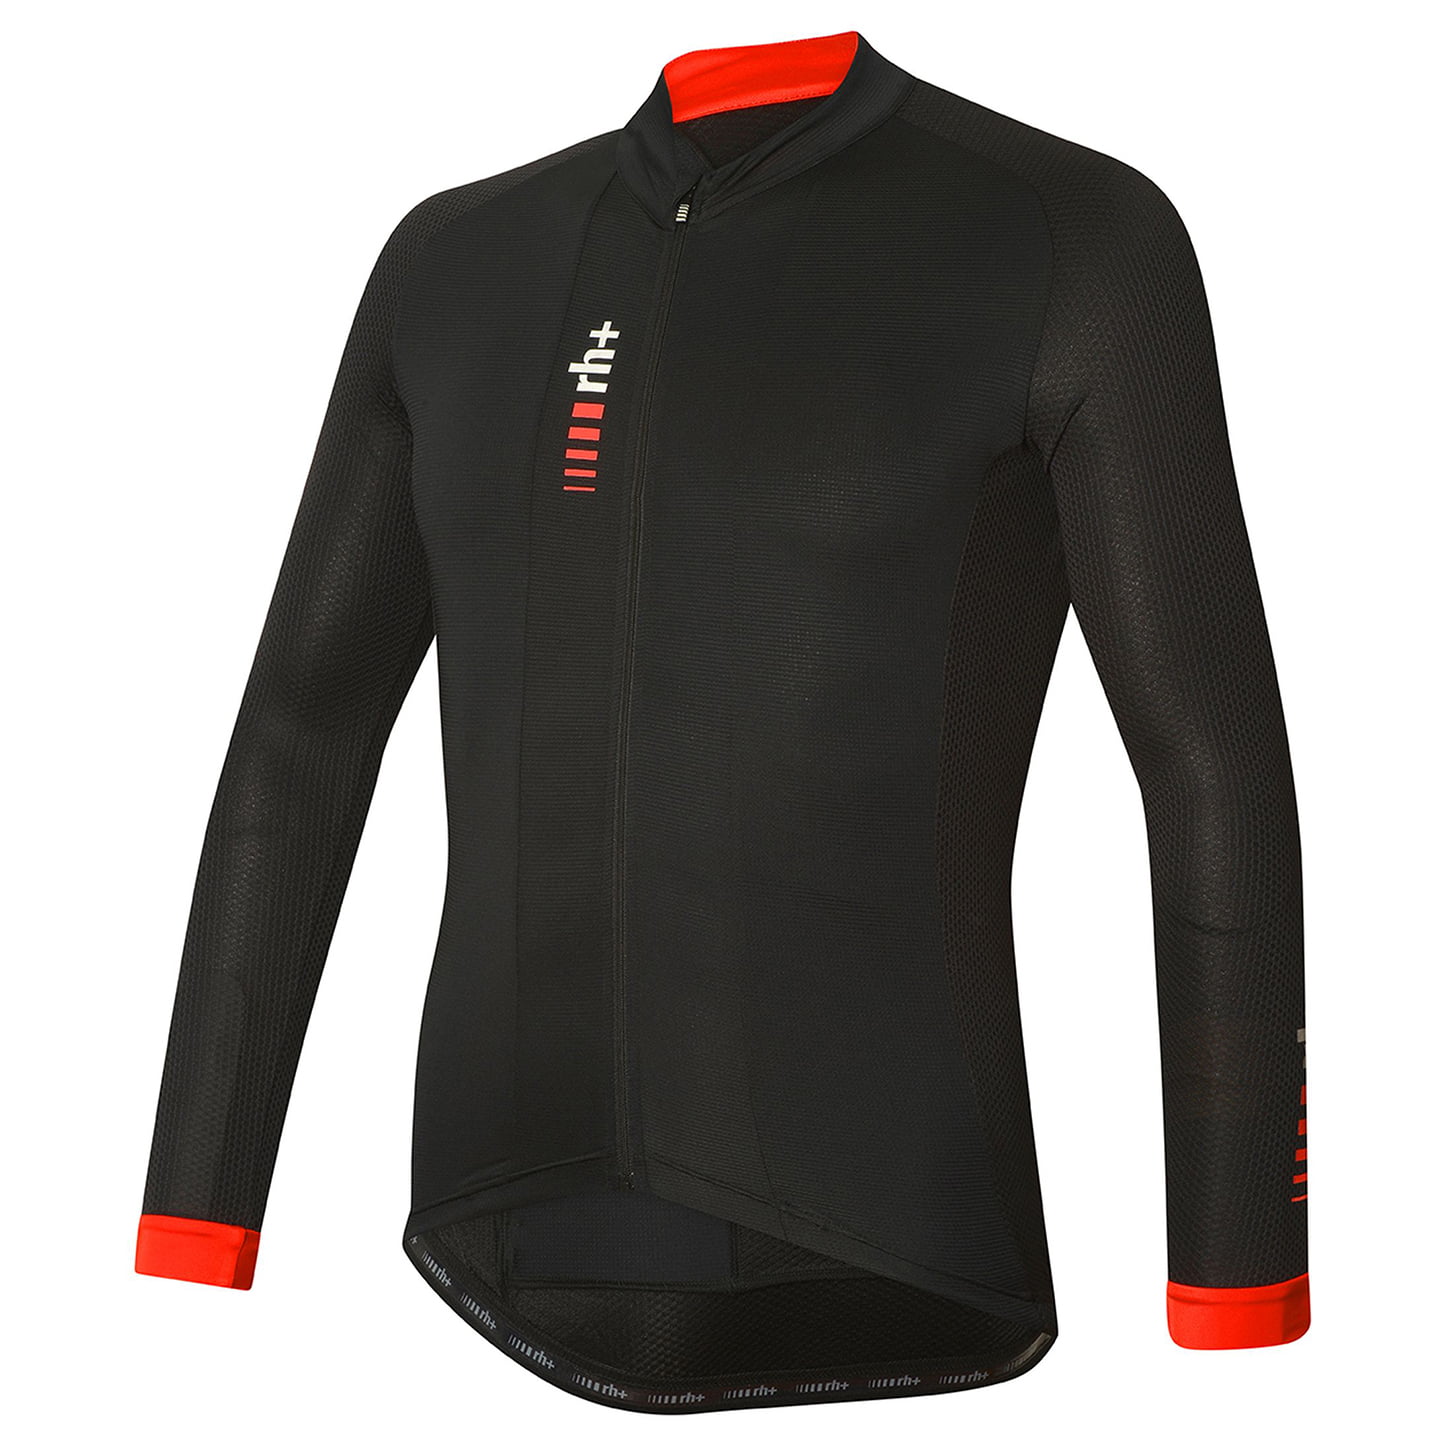 rh+ XYZ Long Sleeve Jersey Long Sleeve Jersey, for men, size XL, Cycling jersey, Cycle clothing